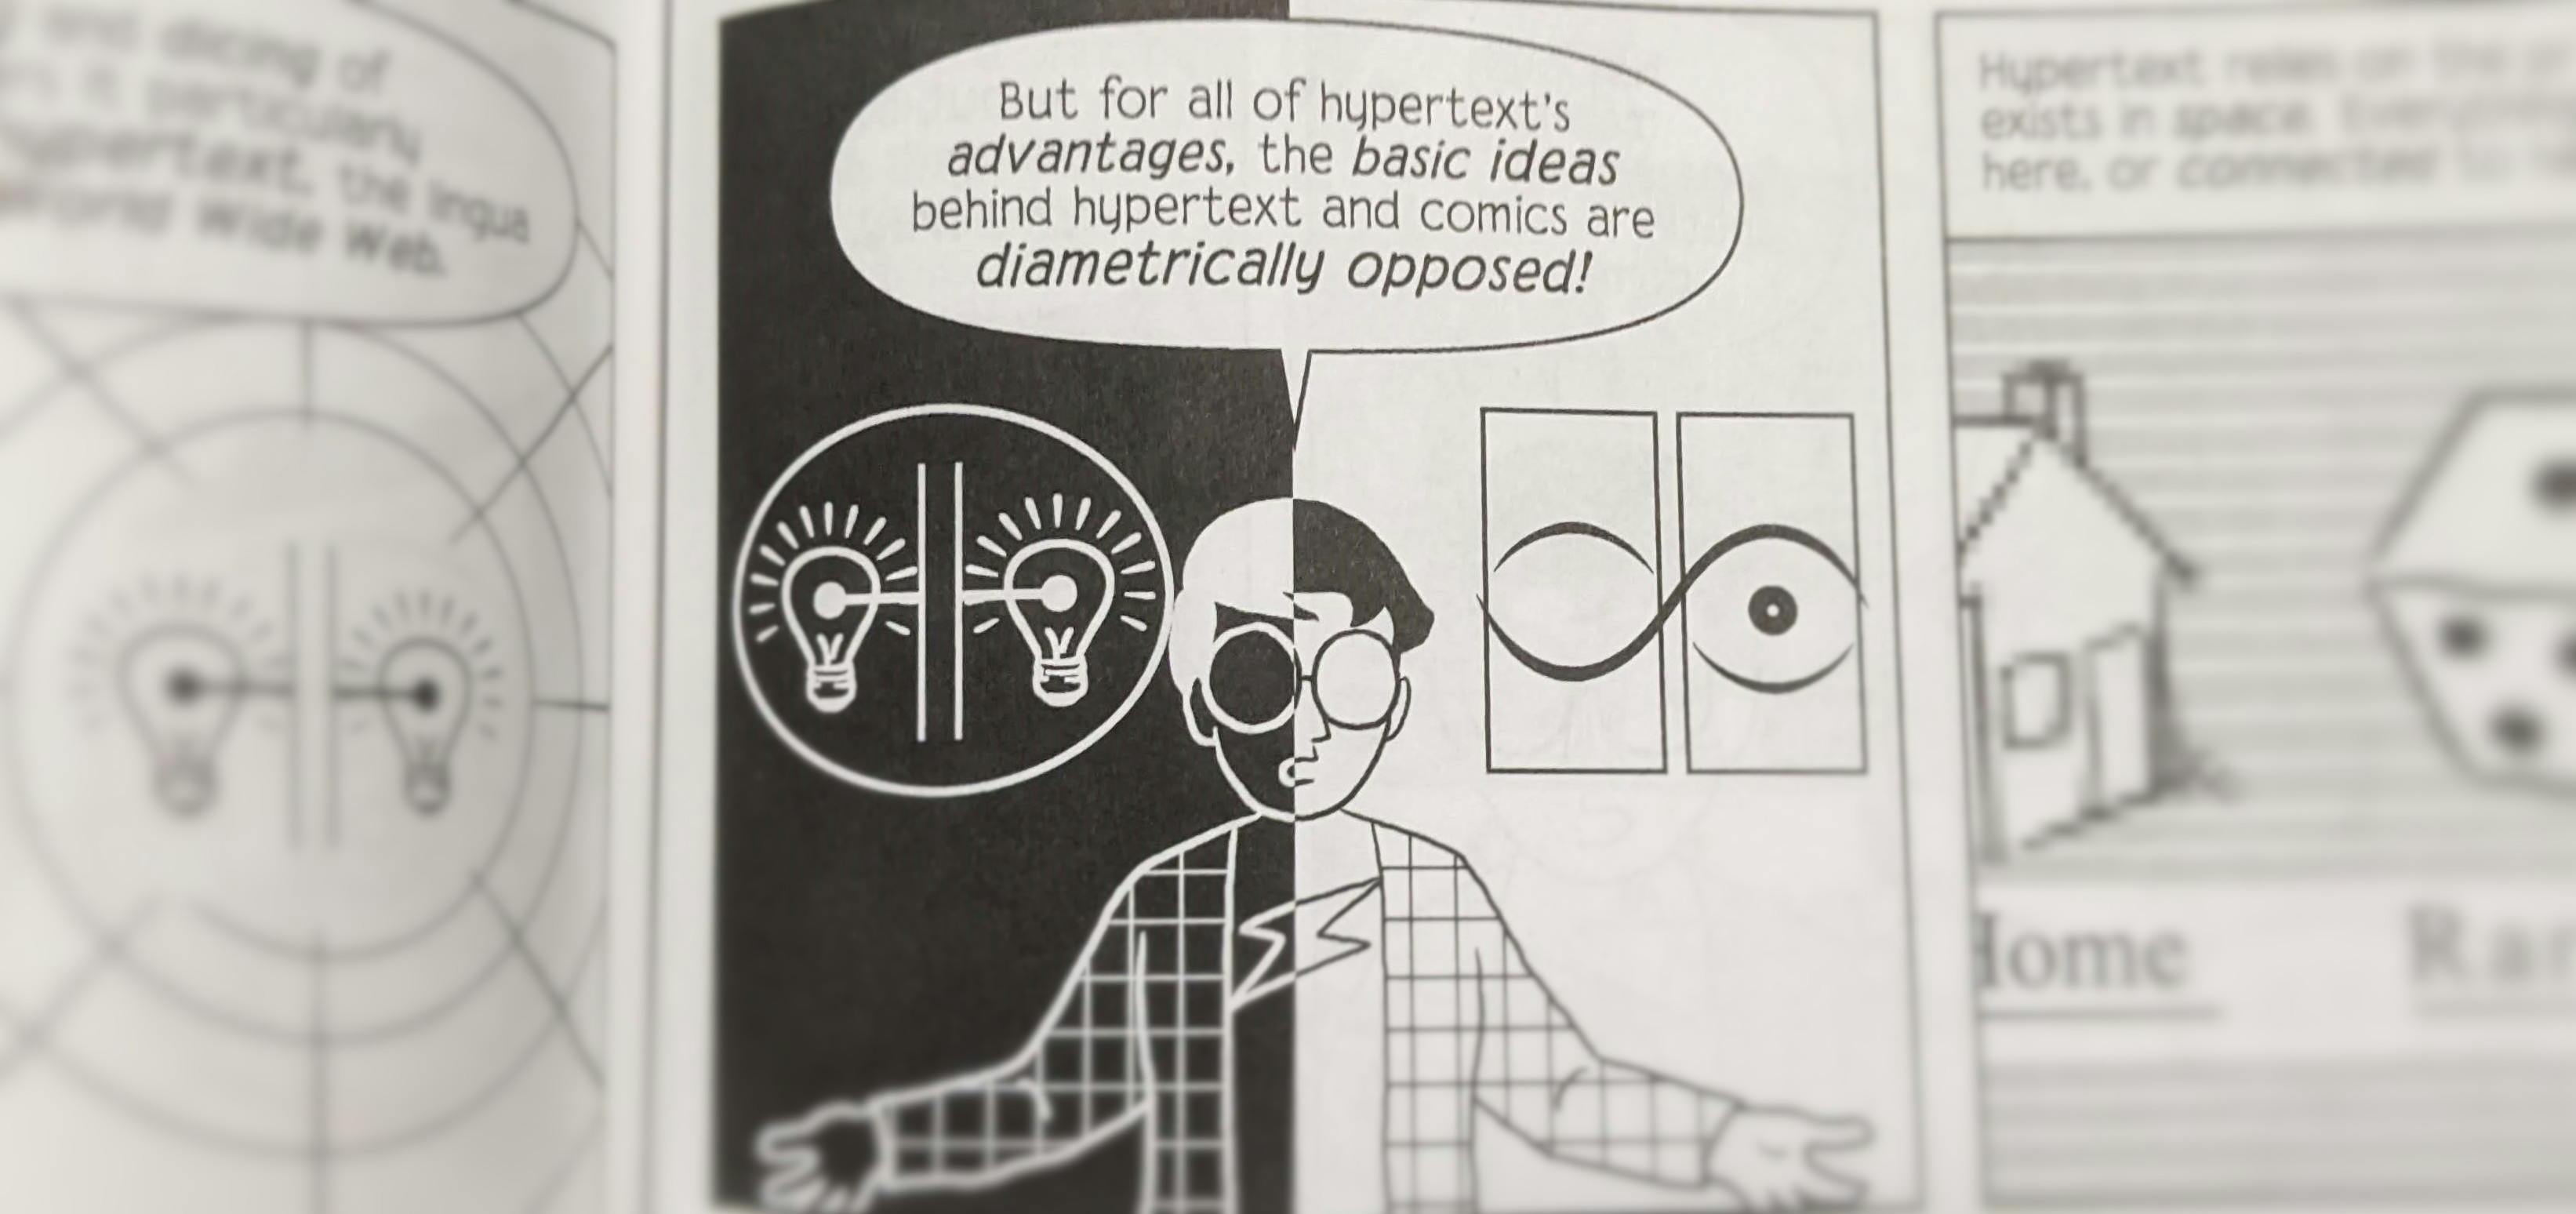 Exerpt from a comic by Scott McCloud that reads "But for all of hypertext's advantages, the basic ideas behind hypertext and comics are diametrically opposed!"